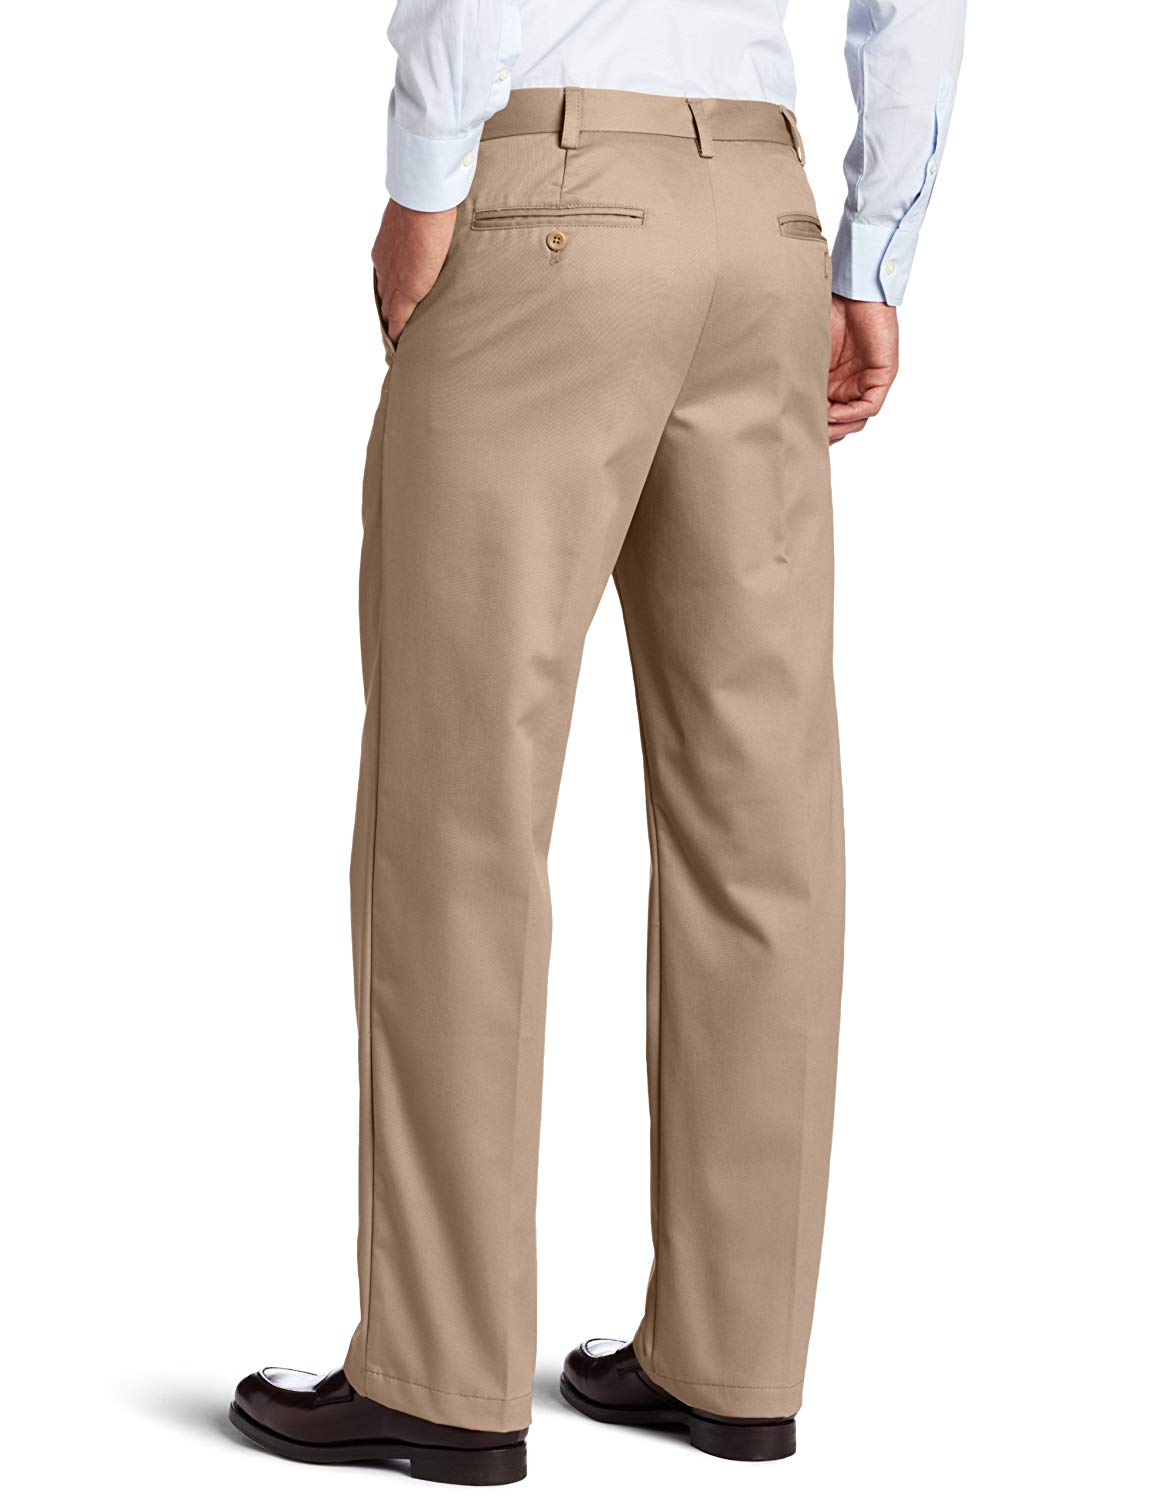 IZOD Men's American Chino Flat Front Straight-Fit Pant,, Beige, Size ...